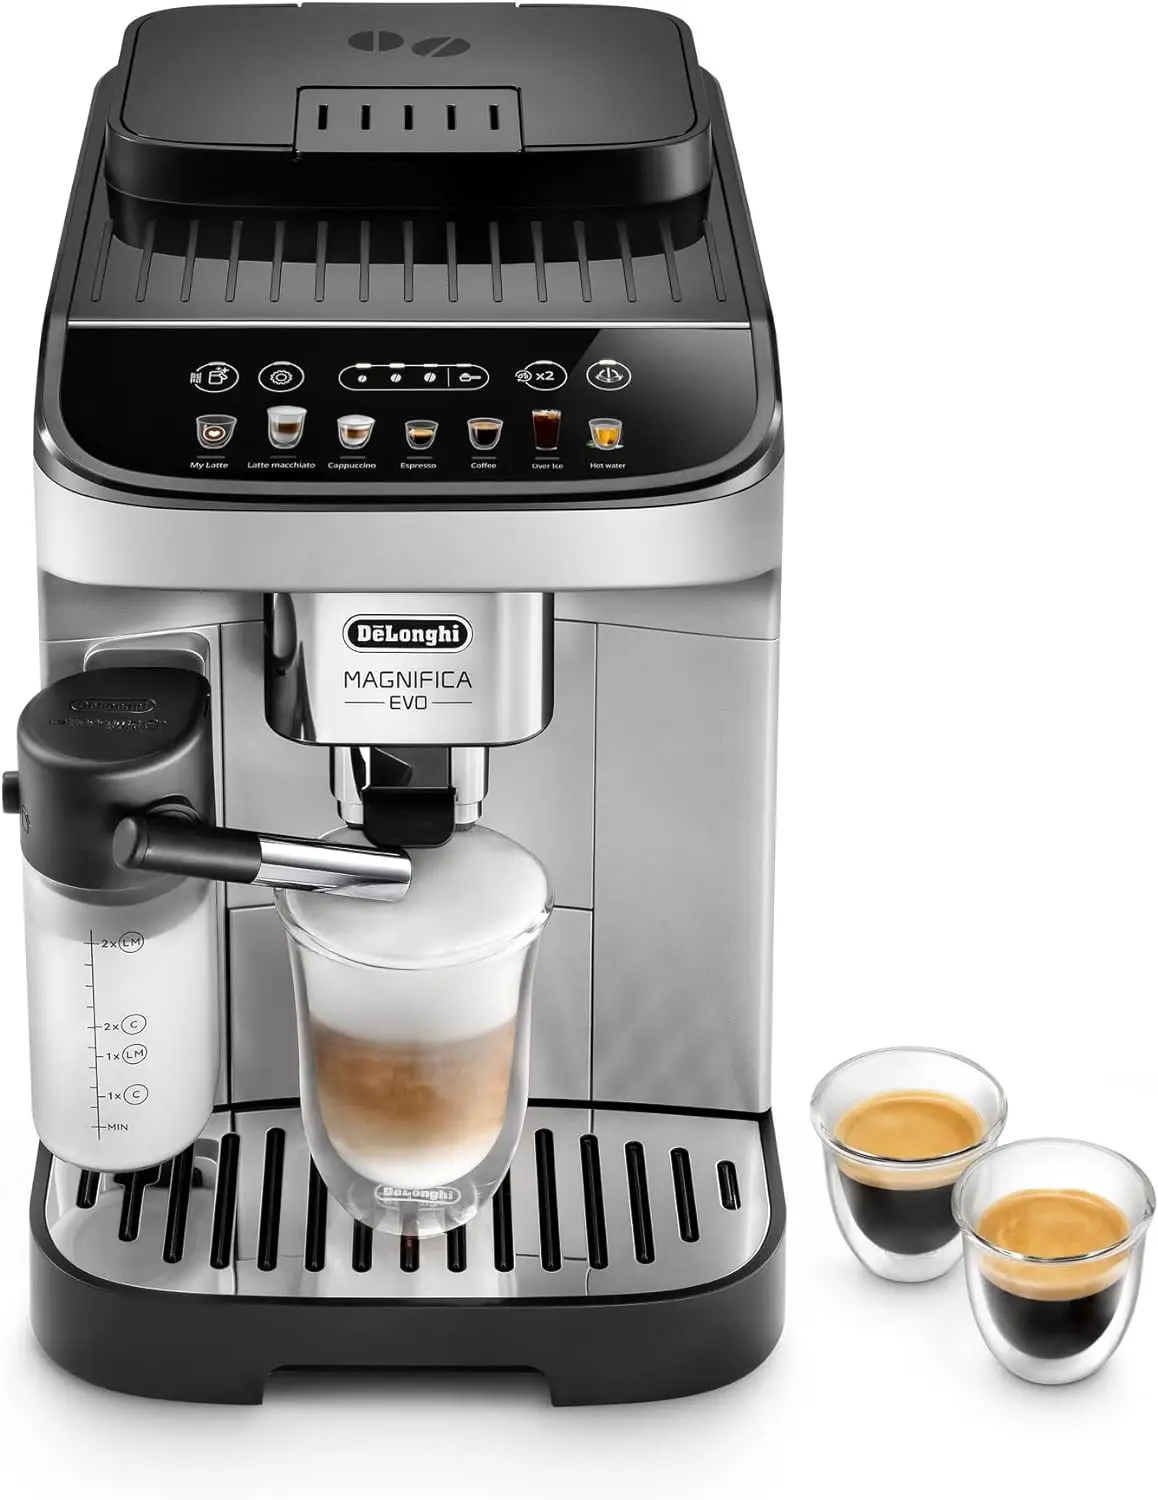 

De'Longhi Magnifica Evo with LatteCrema System, Fully Automatic Machine Bean to Cup Espresso Cappuccino and Iced Coffee Maker,